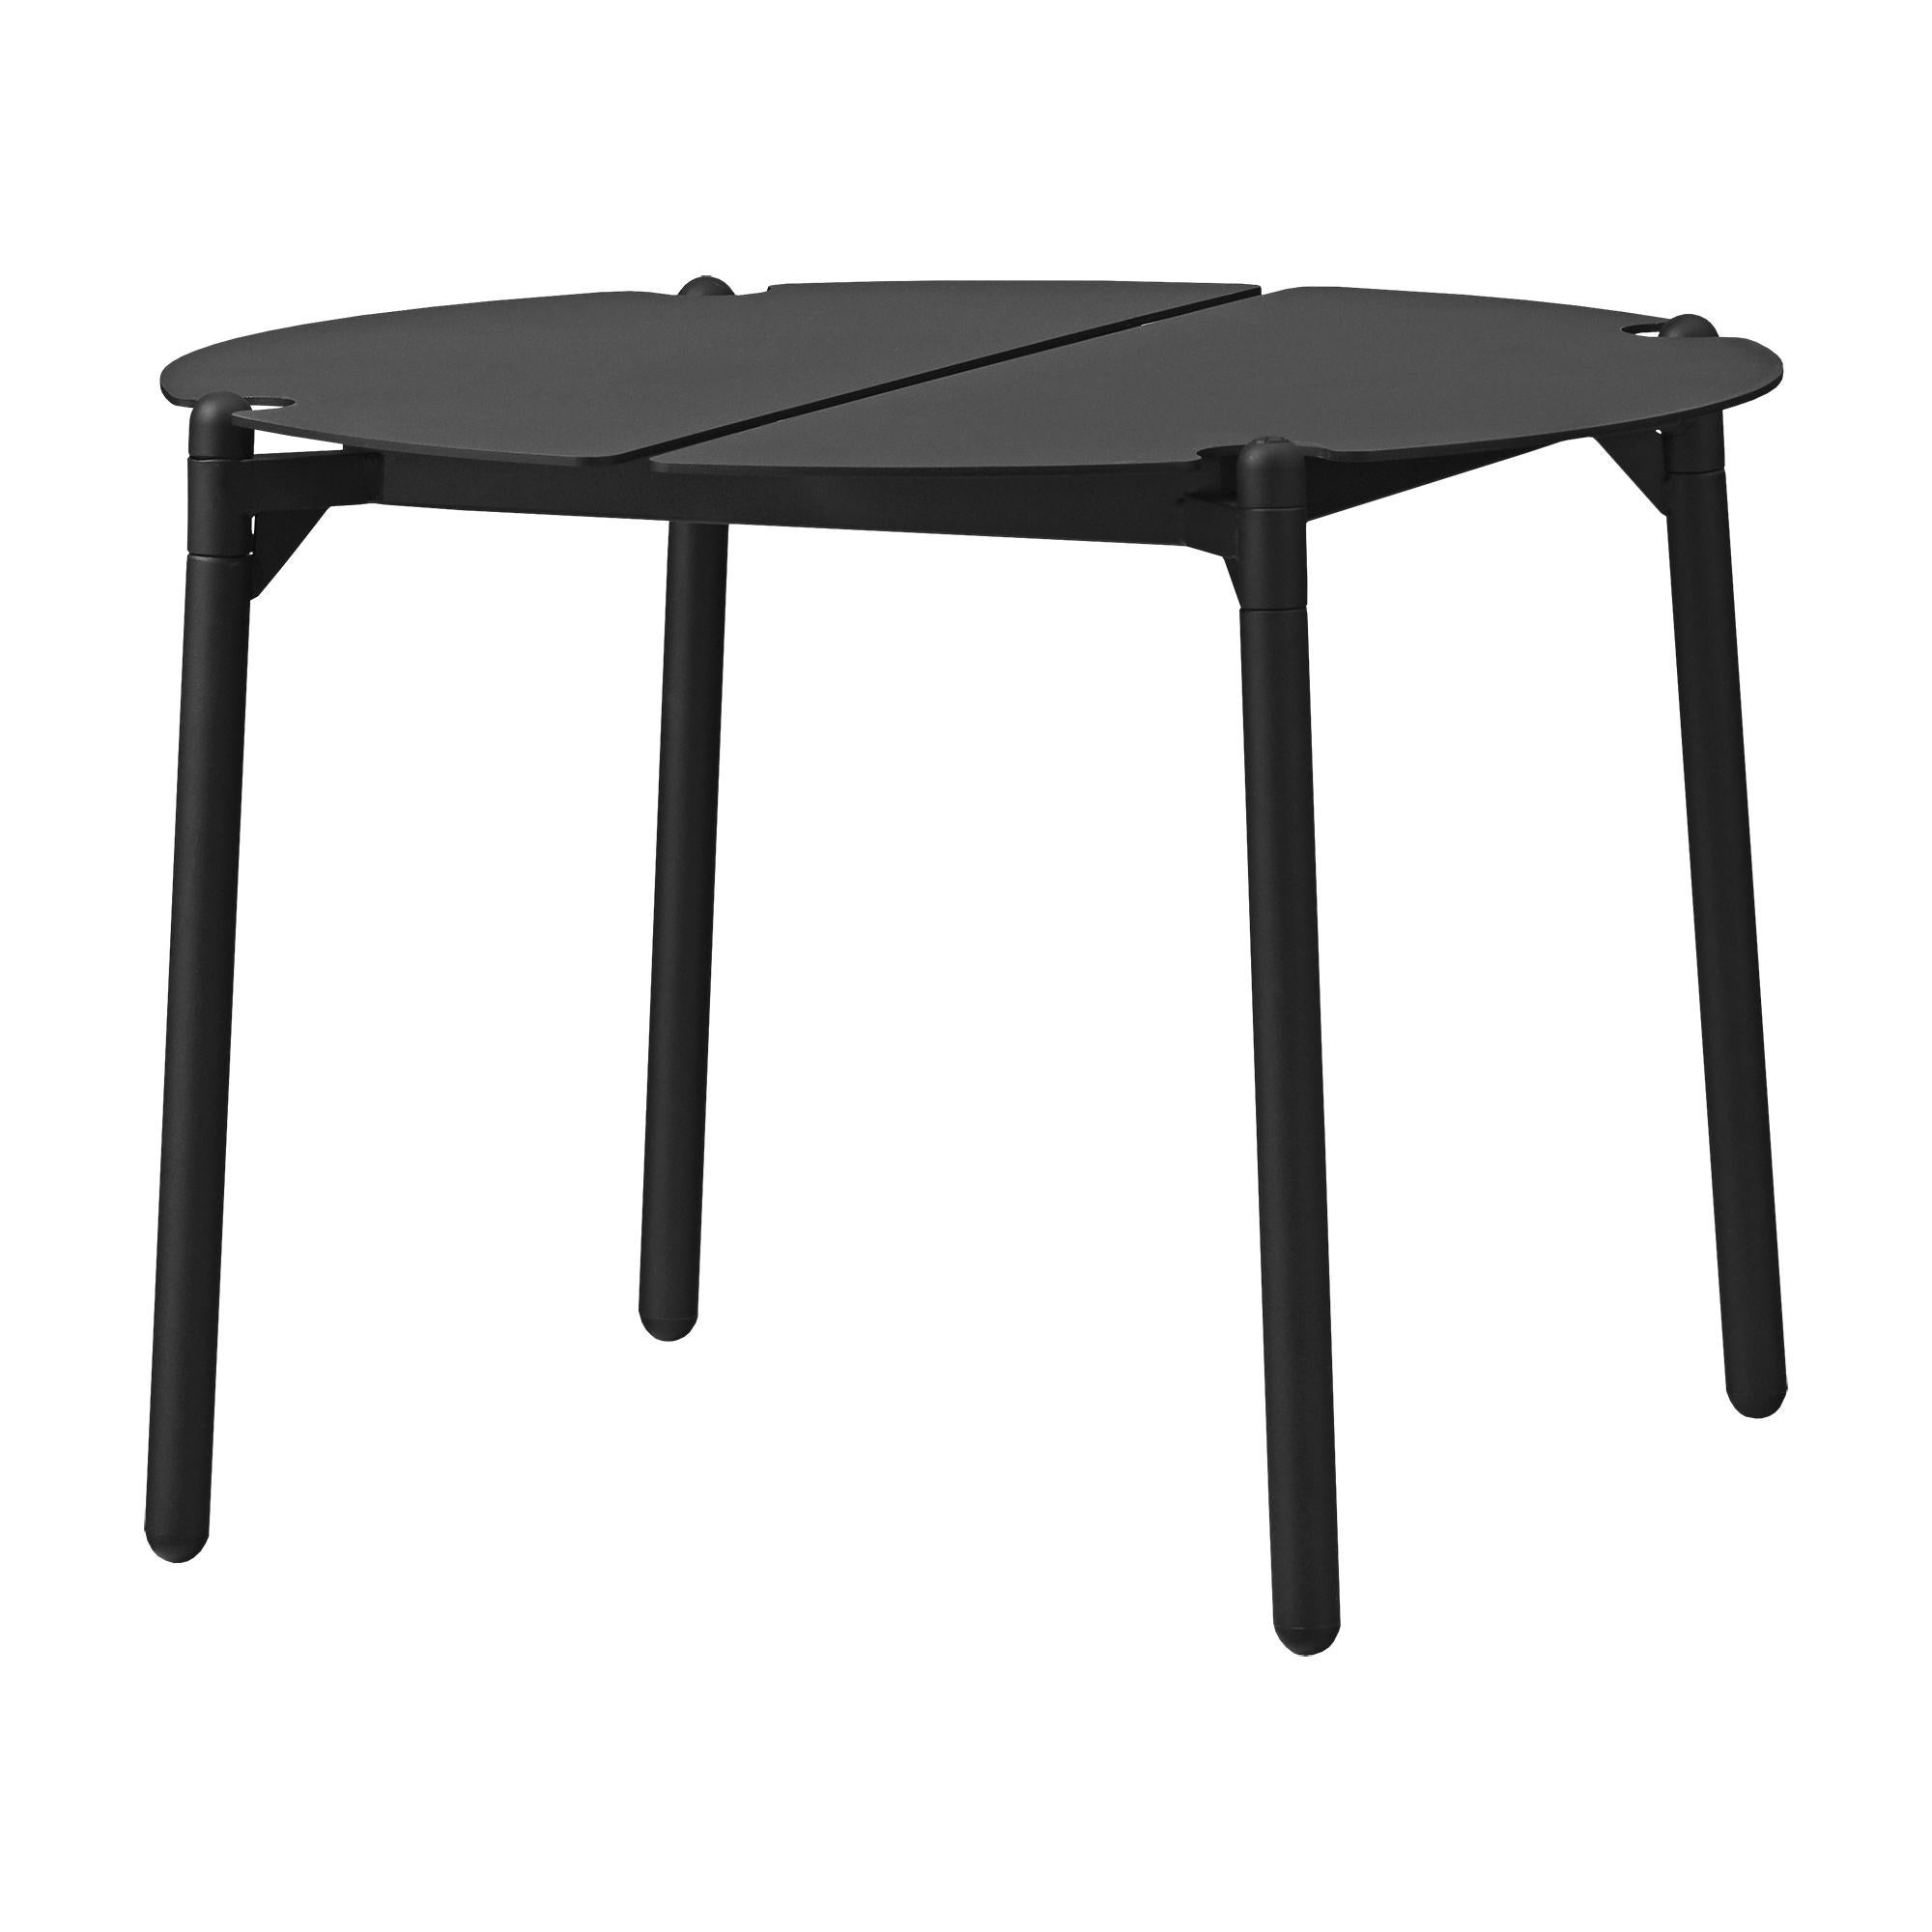 Small black Minimalist lounge table
Dimensions: diameter 50 x height 35 cm 
Materials: steel w. matte powder coating & aluminum w. matte powder coating.
Available in colors: taupe, bordeaux, forest, ginger bread, black and, black and